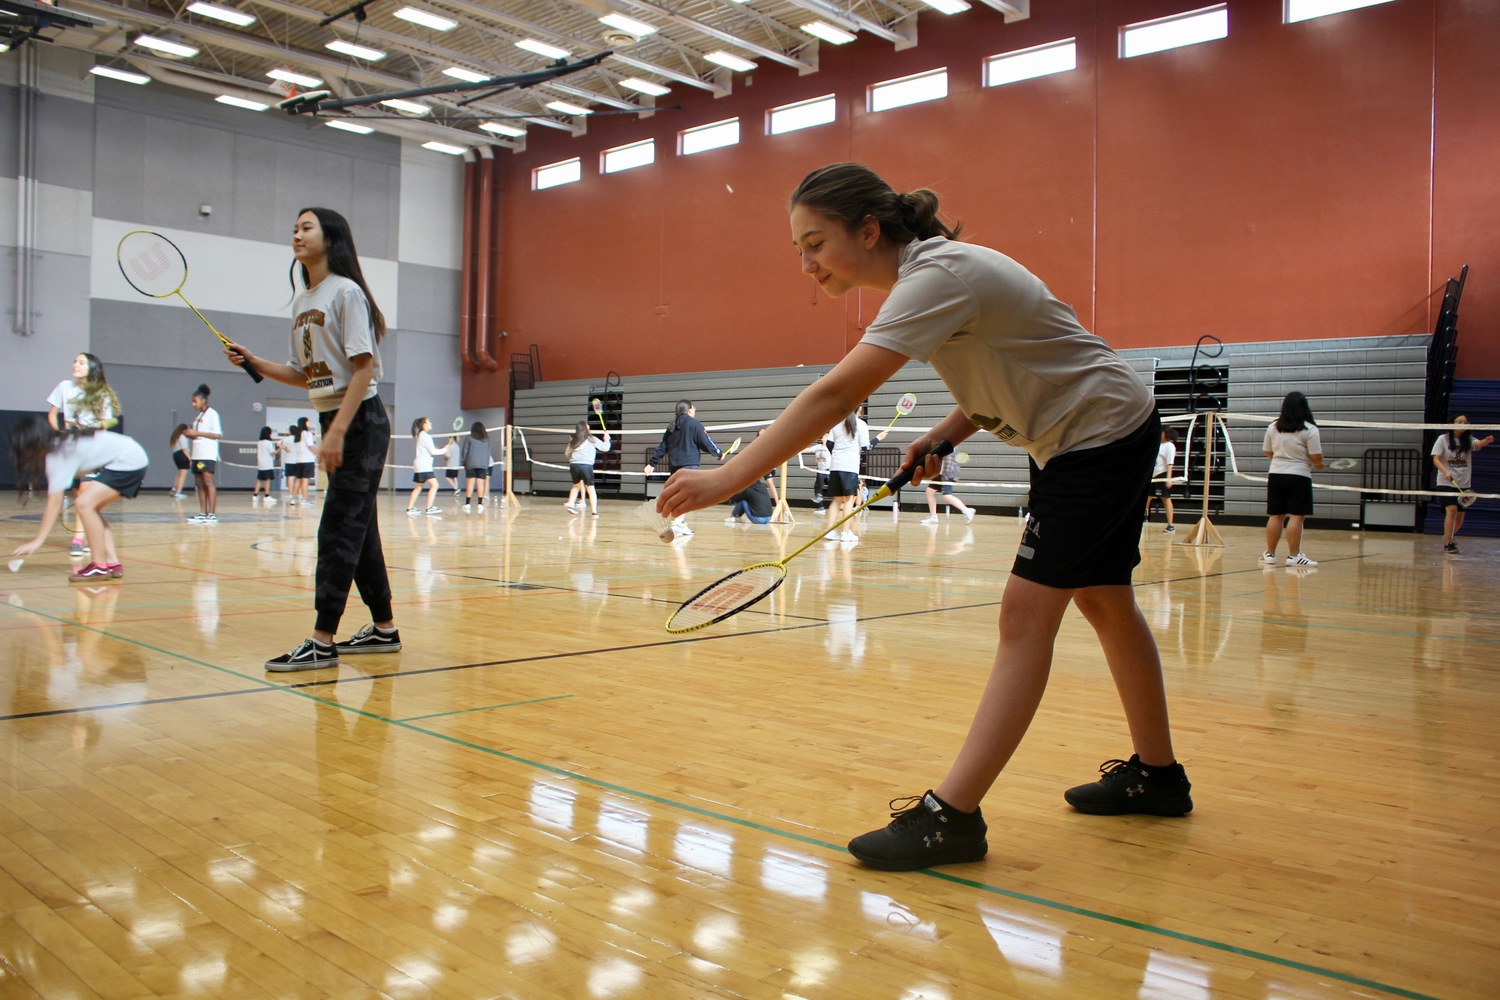 80 spots for Badminton served quickly